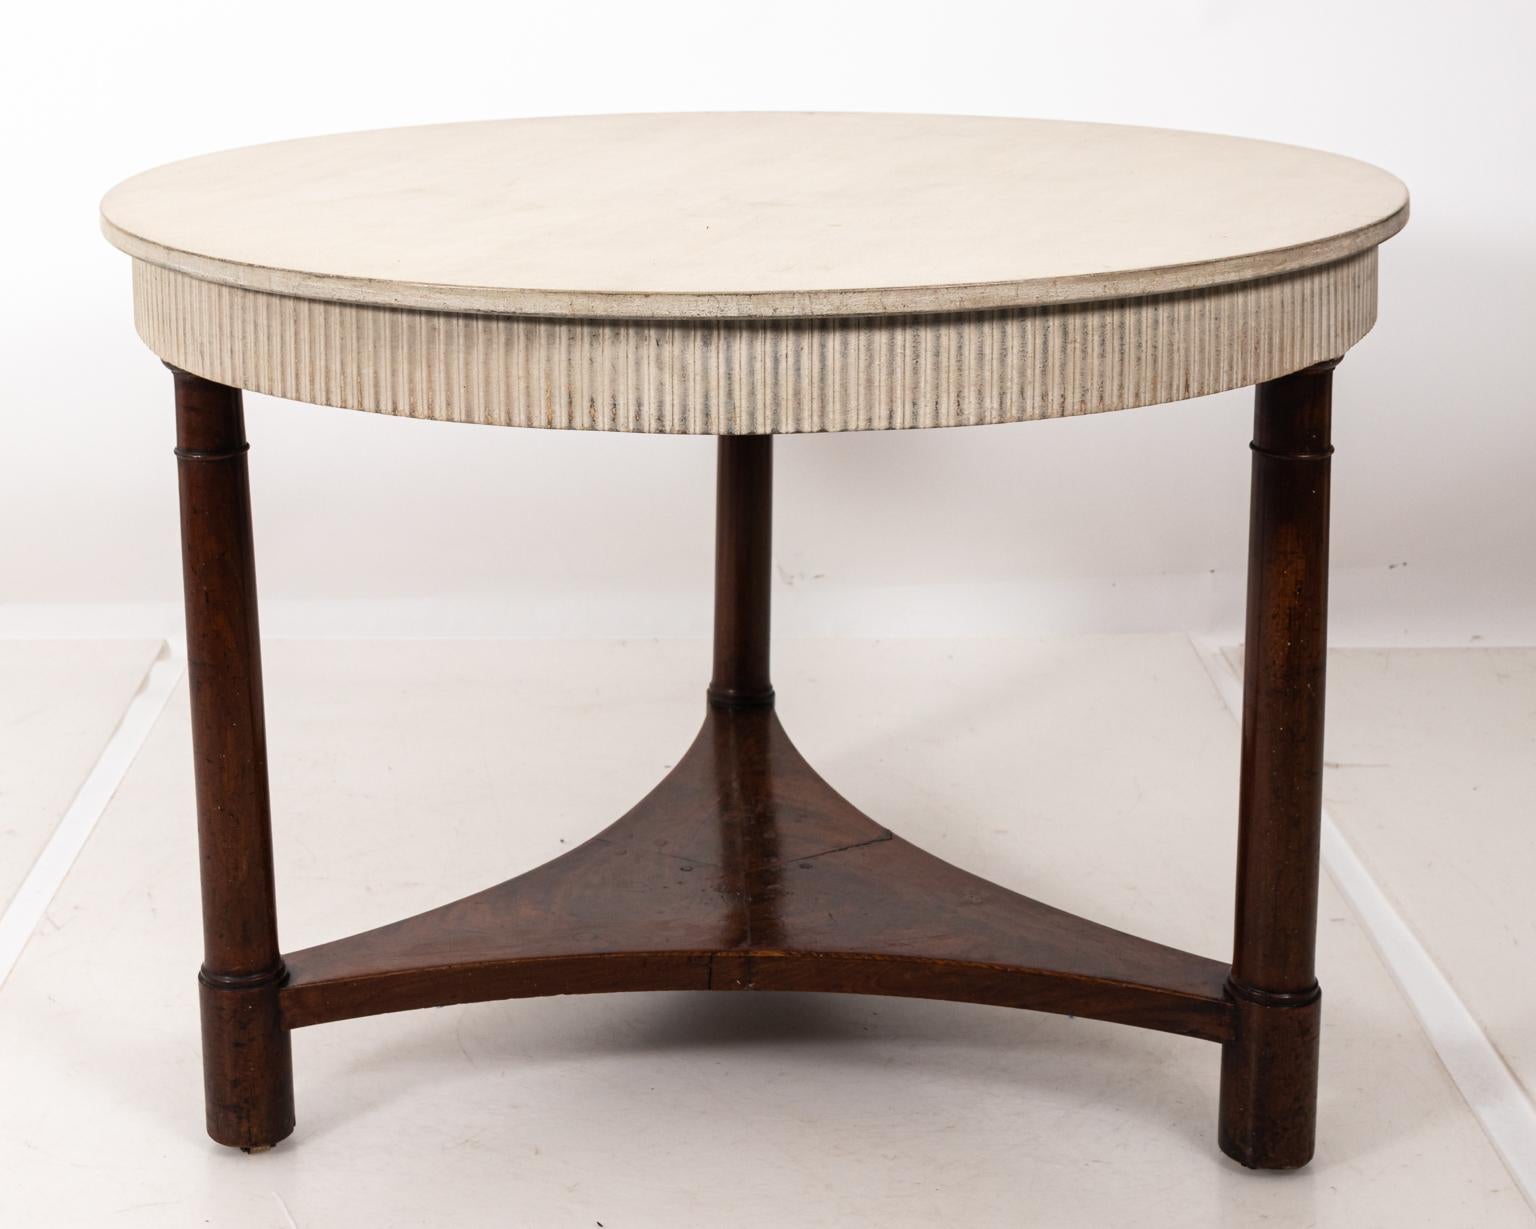 Painted Round Empire Style Mahogany Accent Table